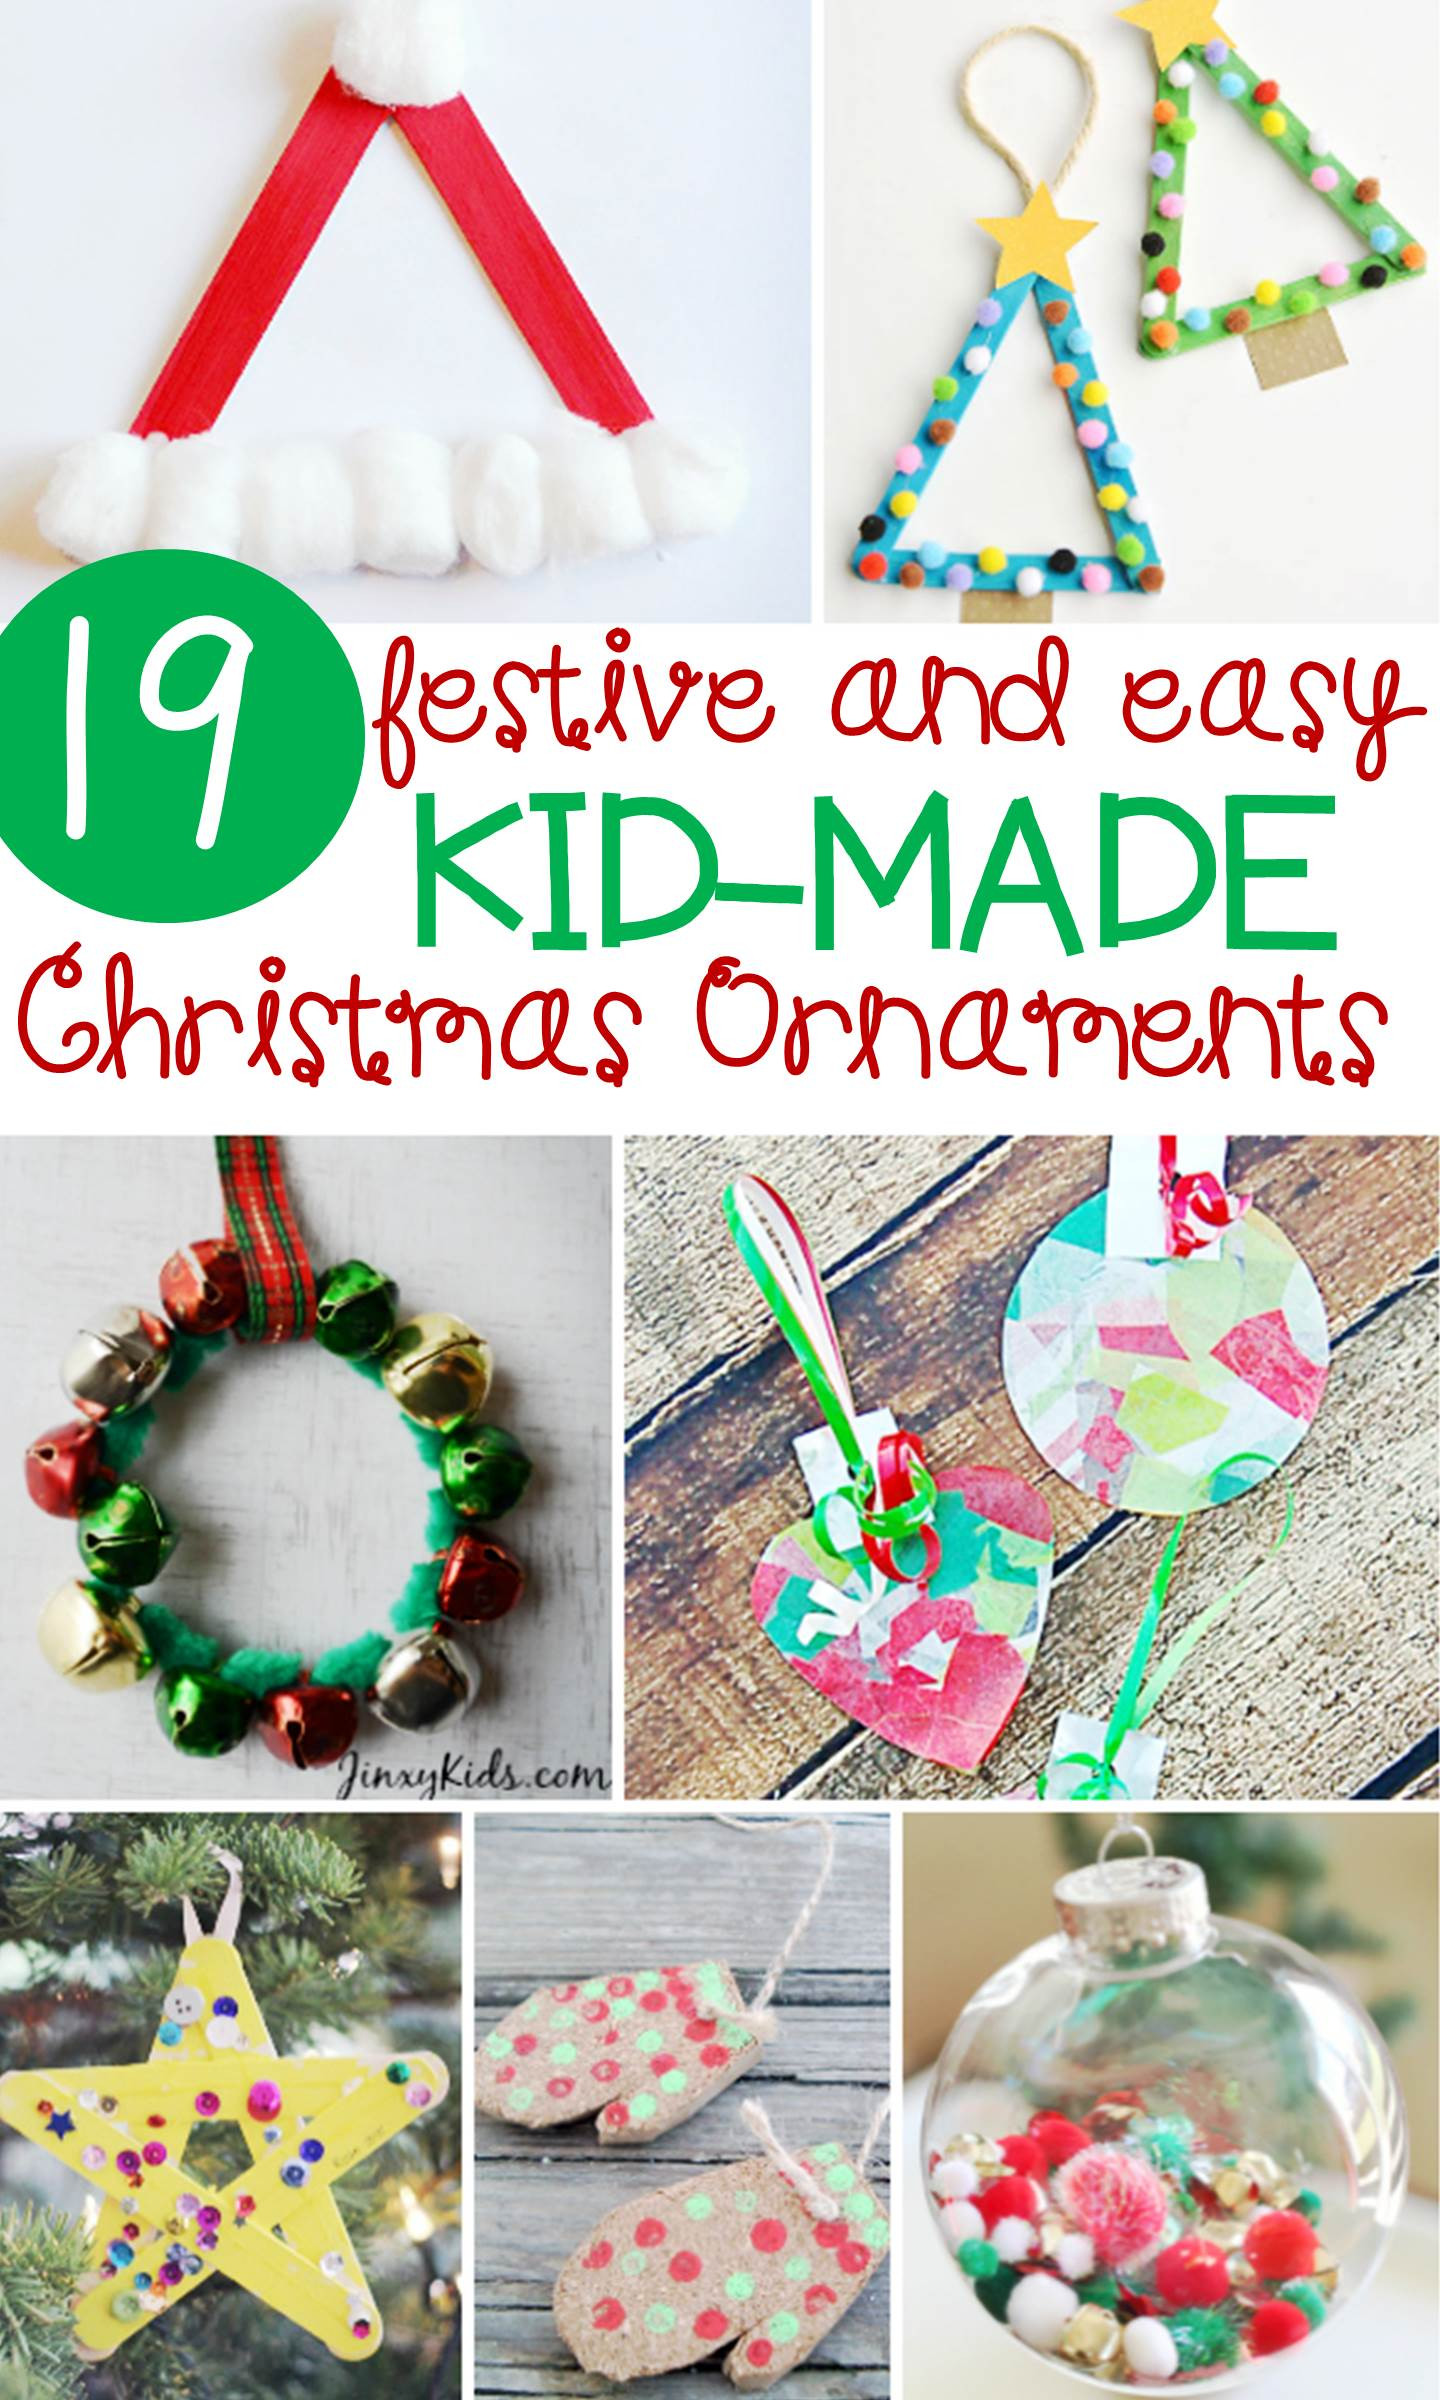 Christmas Crafts For Preschoolers On Pinterest
 Festive and Simple Kids Christmas Ornaments The